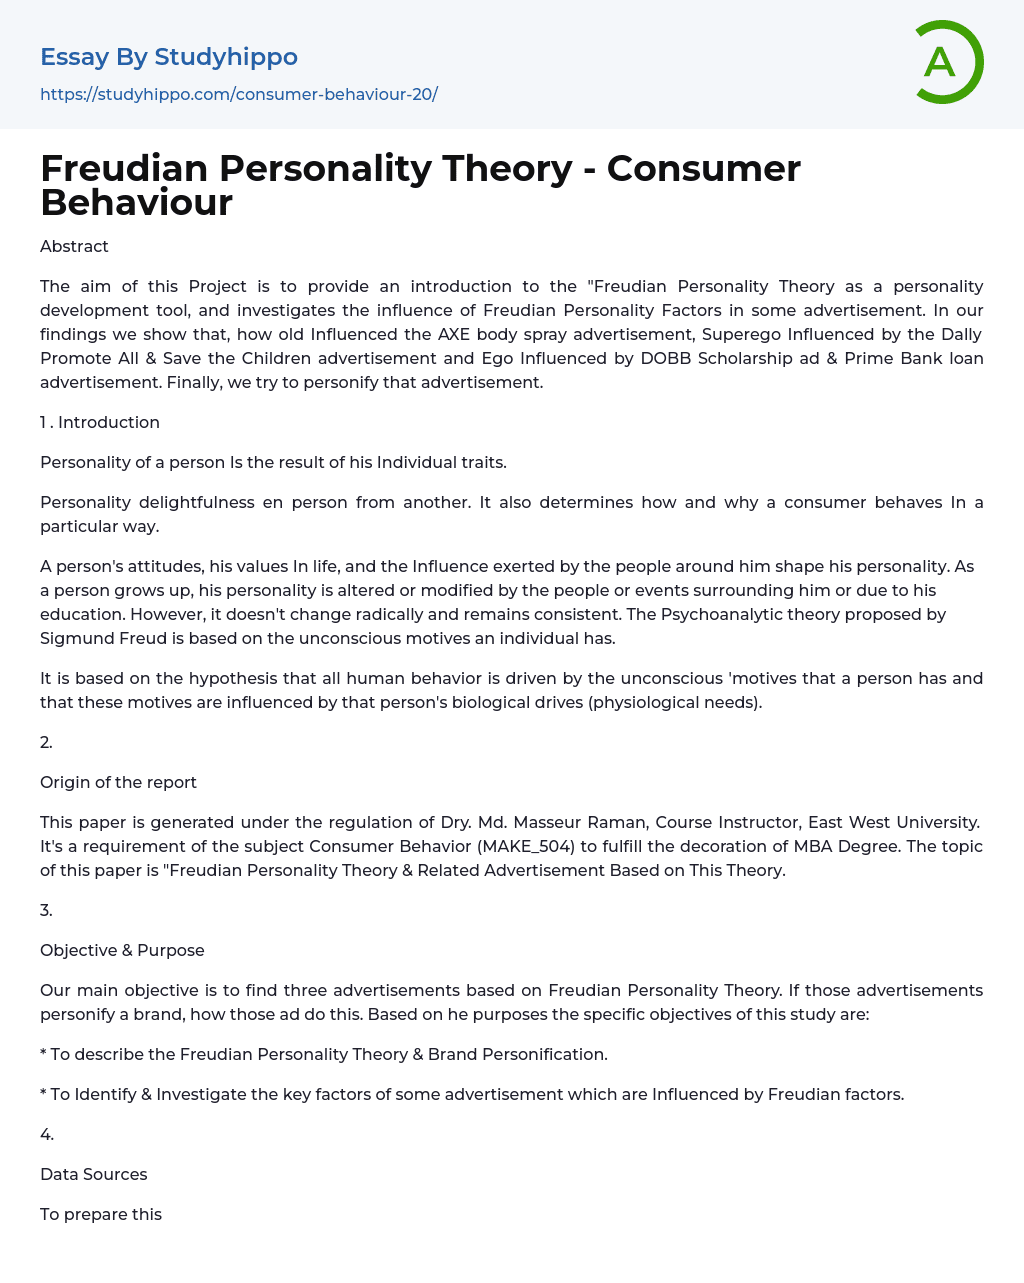 Freudian Personality Theory – Consumer Behaviour Essay Example